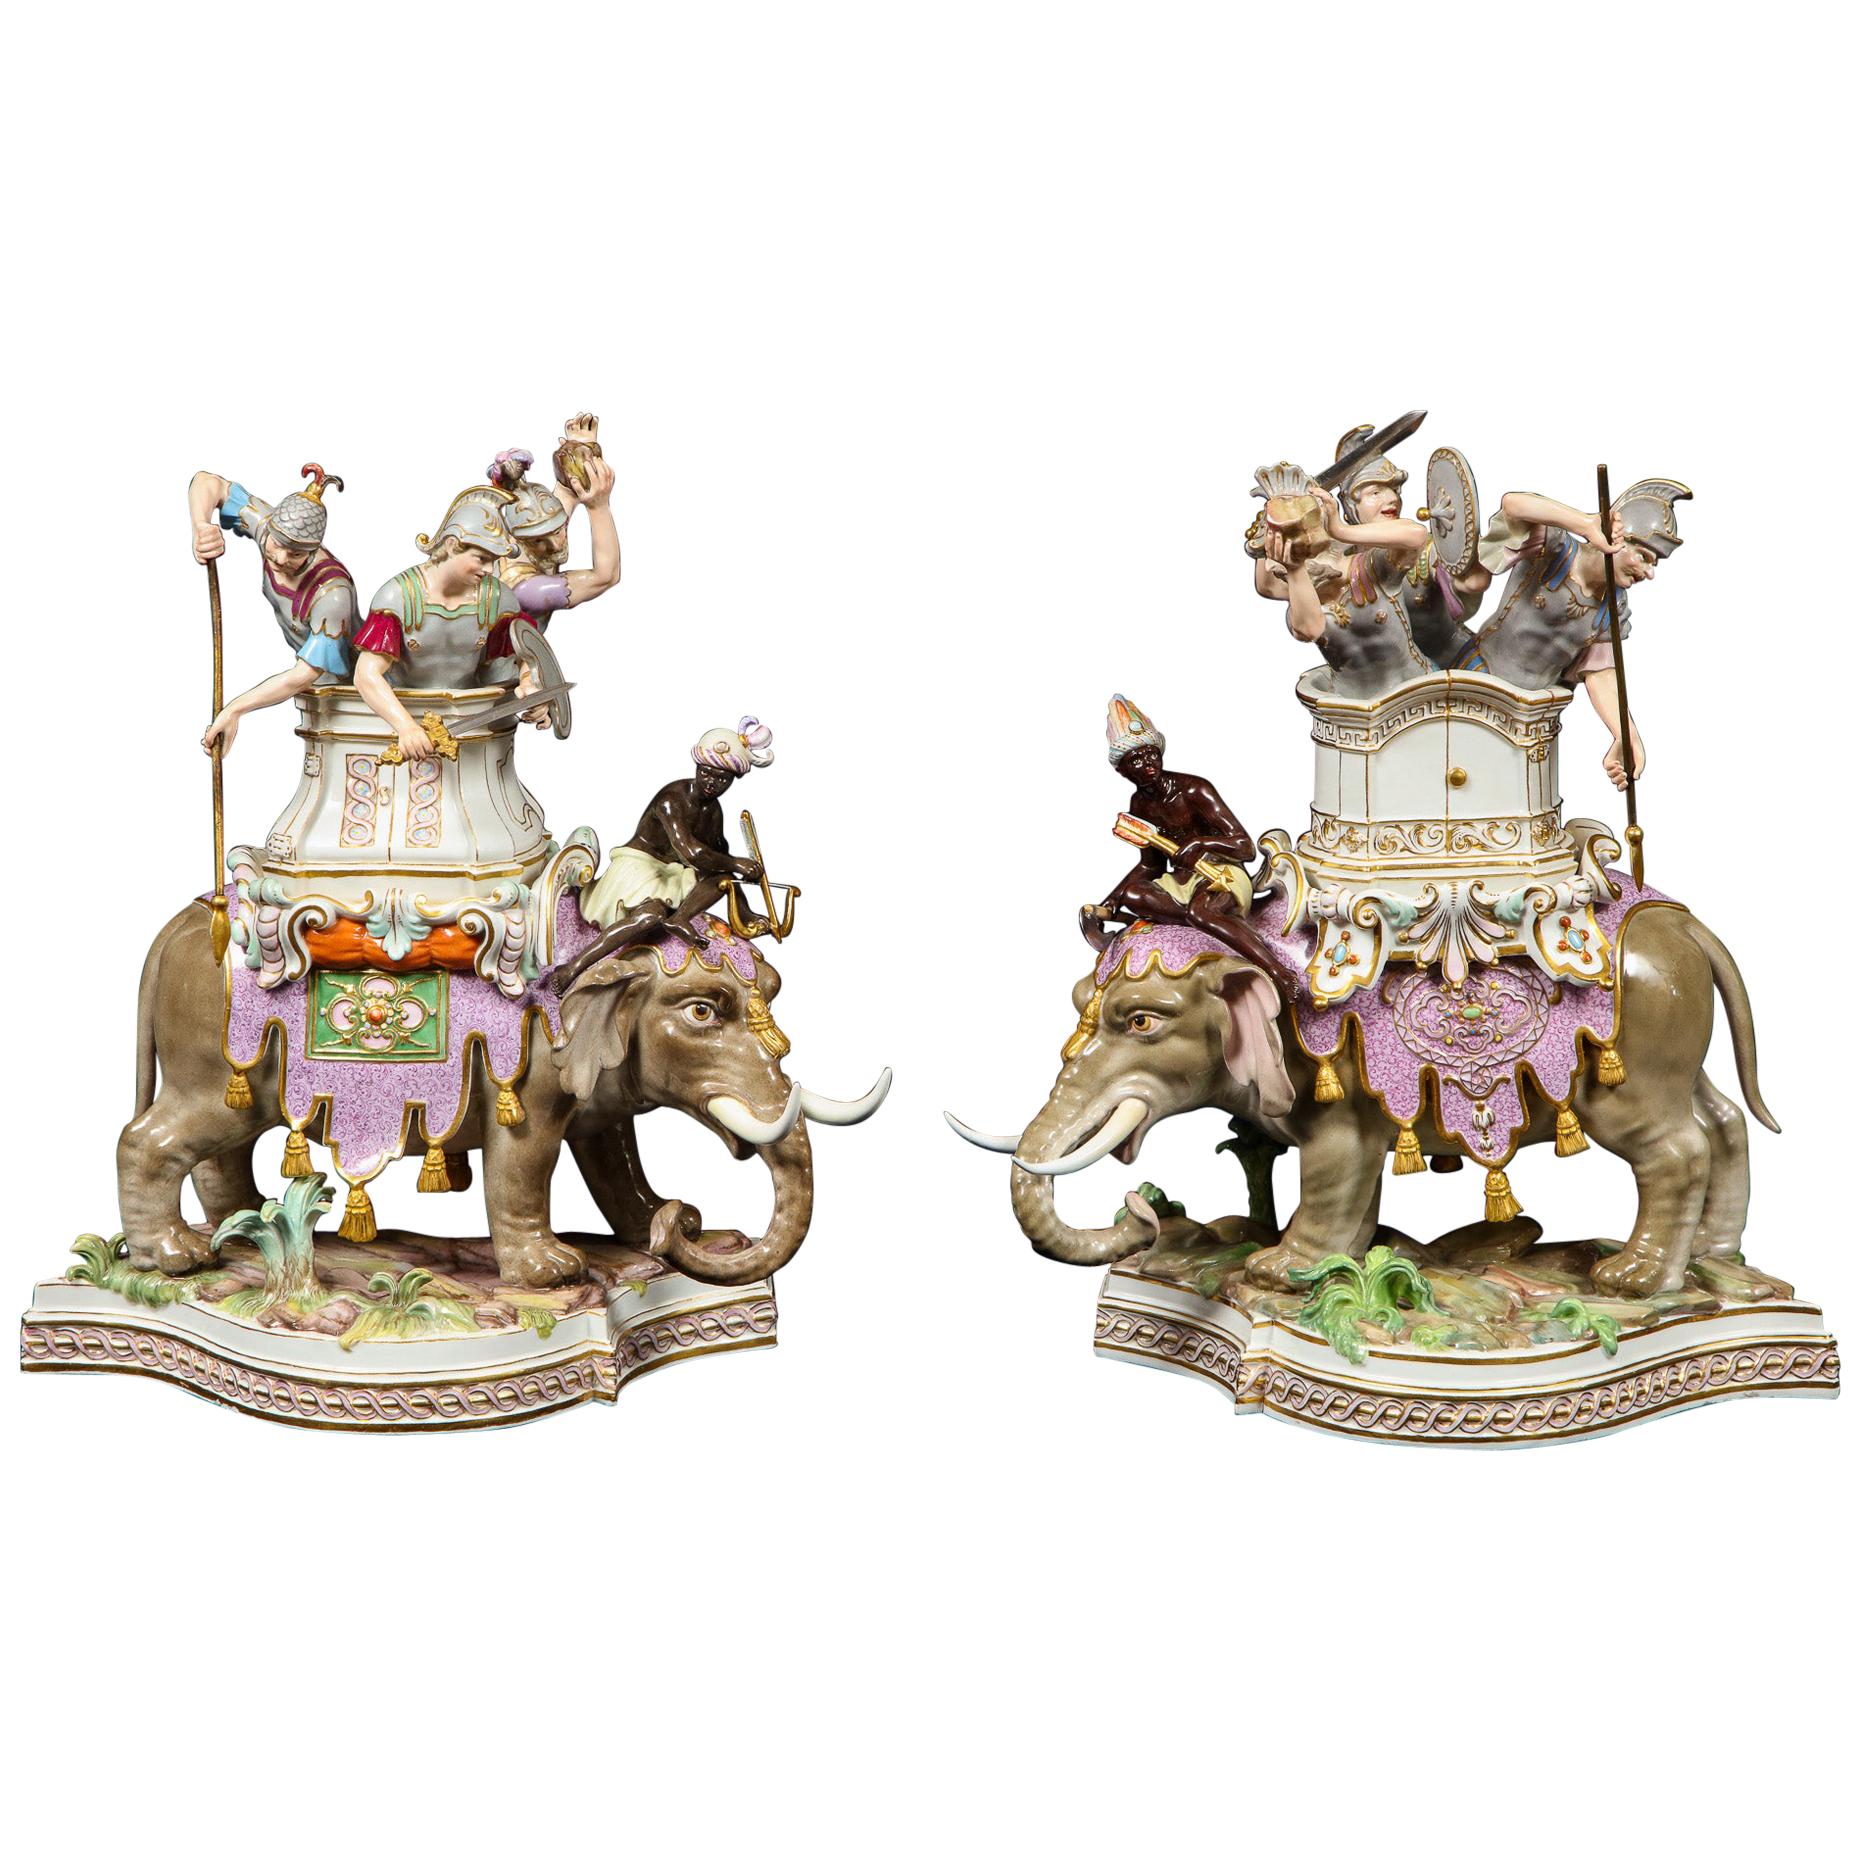 Important Meissen Porcelain Groups of Caparisoned Elephants and Soldiers